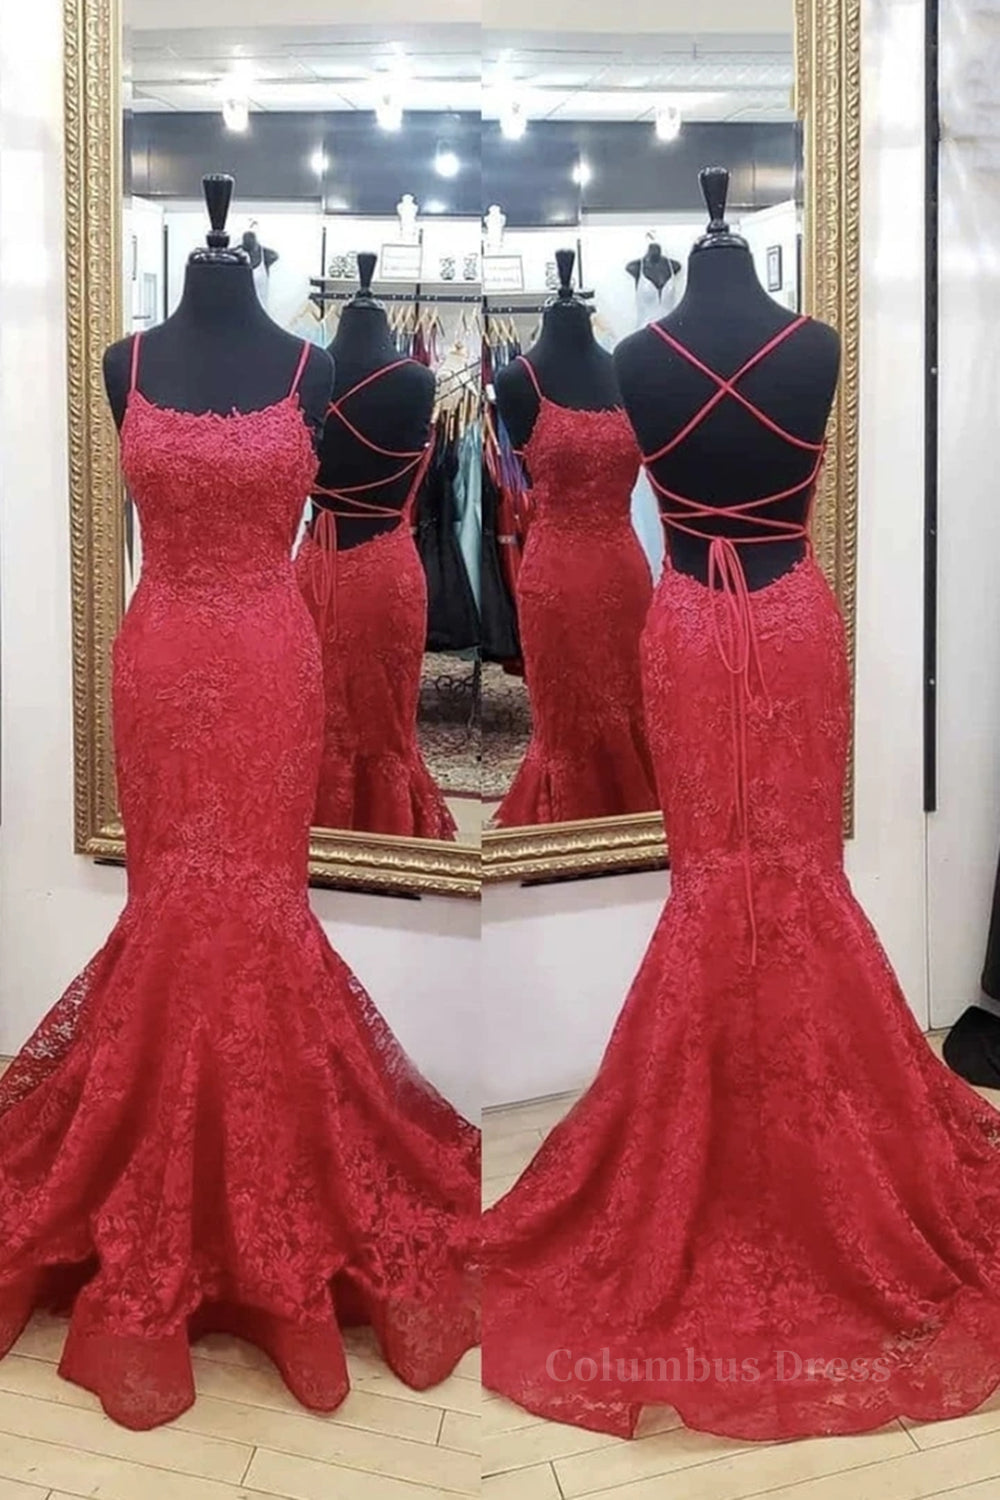 Backless Mermaid Red Lace Long Corset Prom Dress, Mermaid Red Lace Corset Formal Dress, Red Lace Evening Dress outfit, Evening Dresses Classy